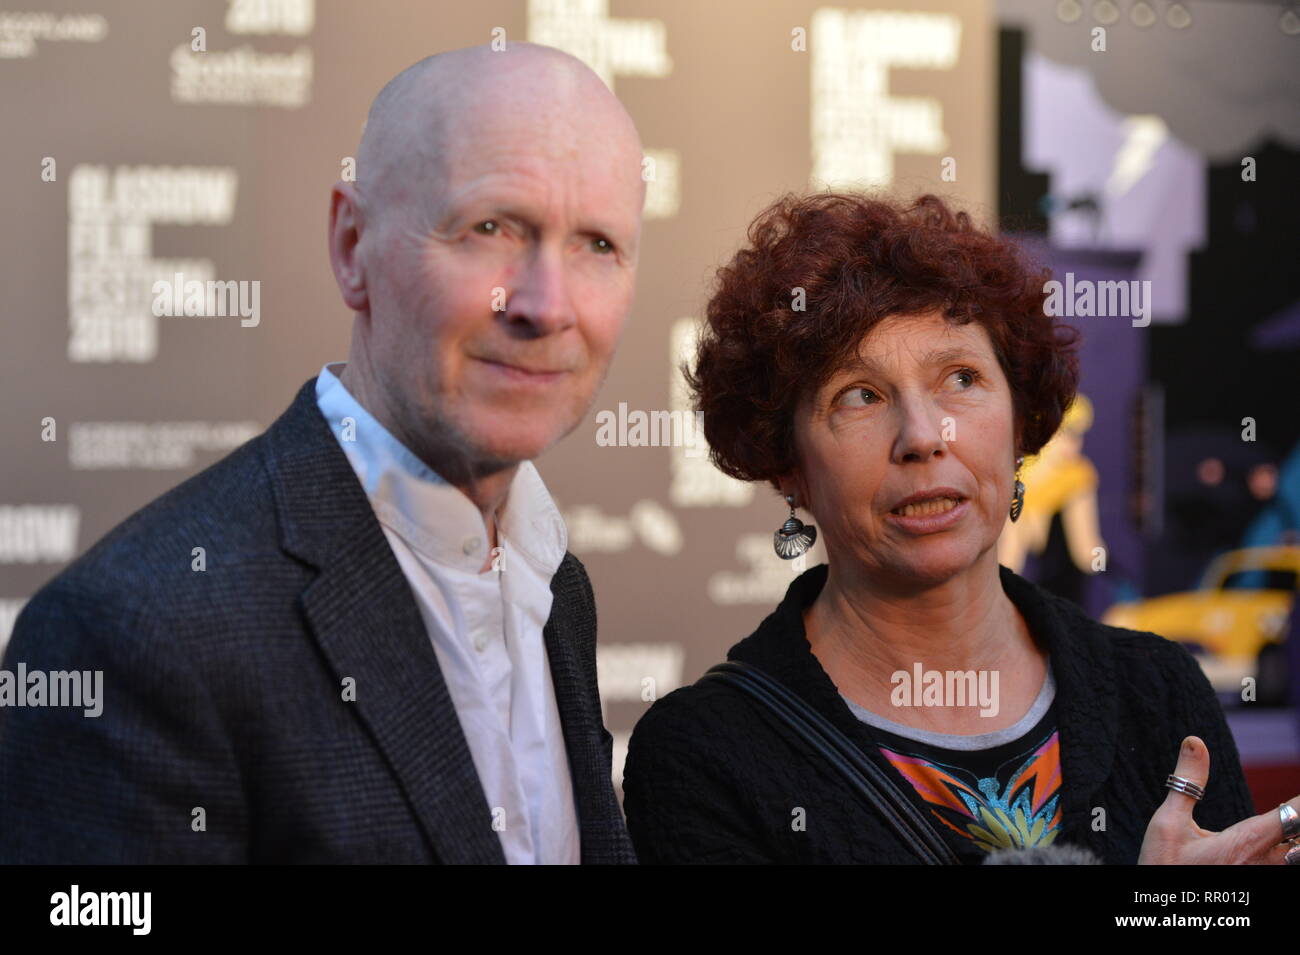 Glasgow, UK. 23 February 2019.  Red Carpet at the Glasgow Film Theatre for the Scottish Premier of the film, Yuli.  Directed by Iciar Bollain (right) and written by Paul Laverty (left), starring actor, Carlos Acosta. Credit: Colin Fisher/Alamy Live News Stock Photo